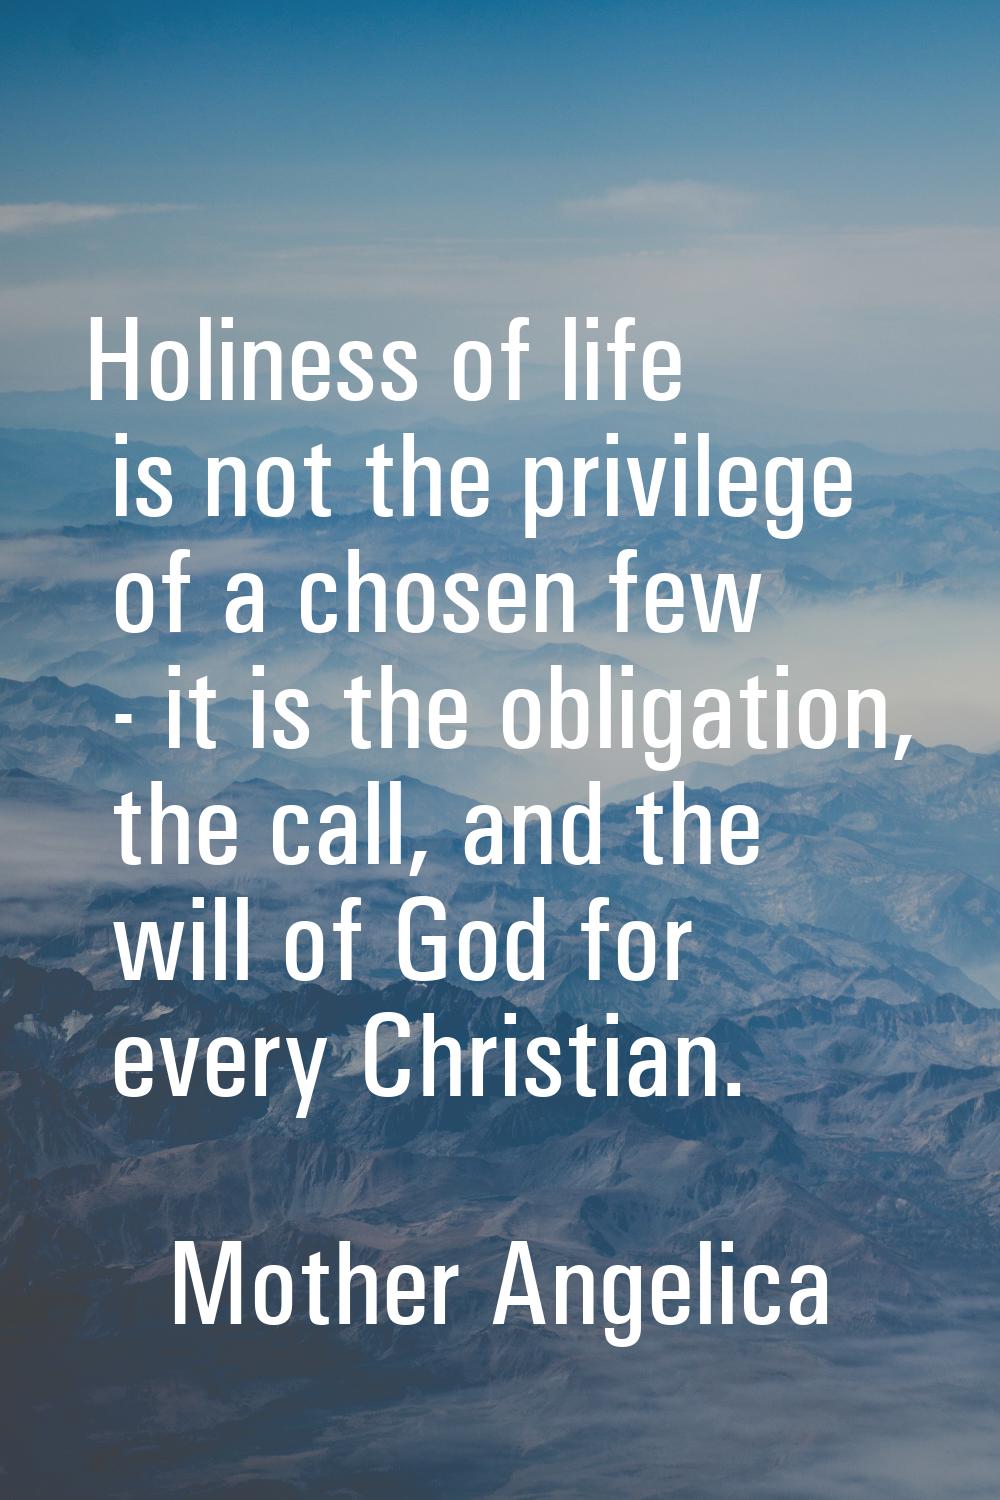 Holiness of life is not the privilege of a chosen few - it is the obligation, the call, and the wil